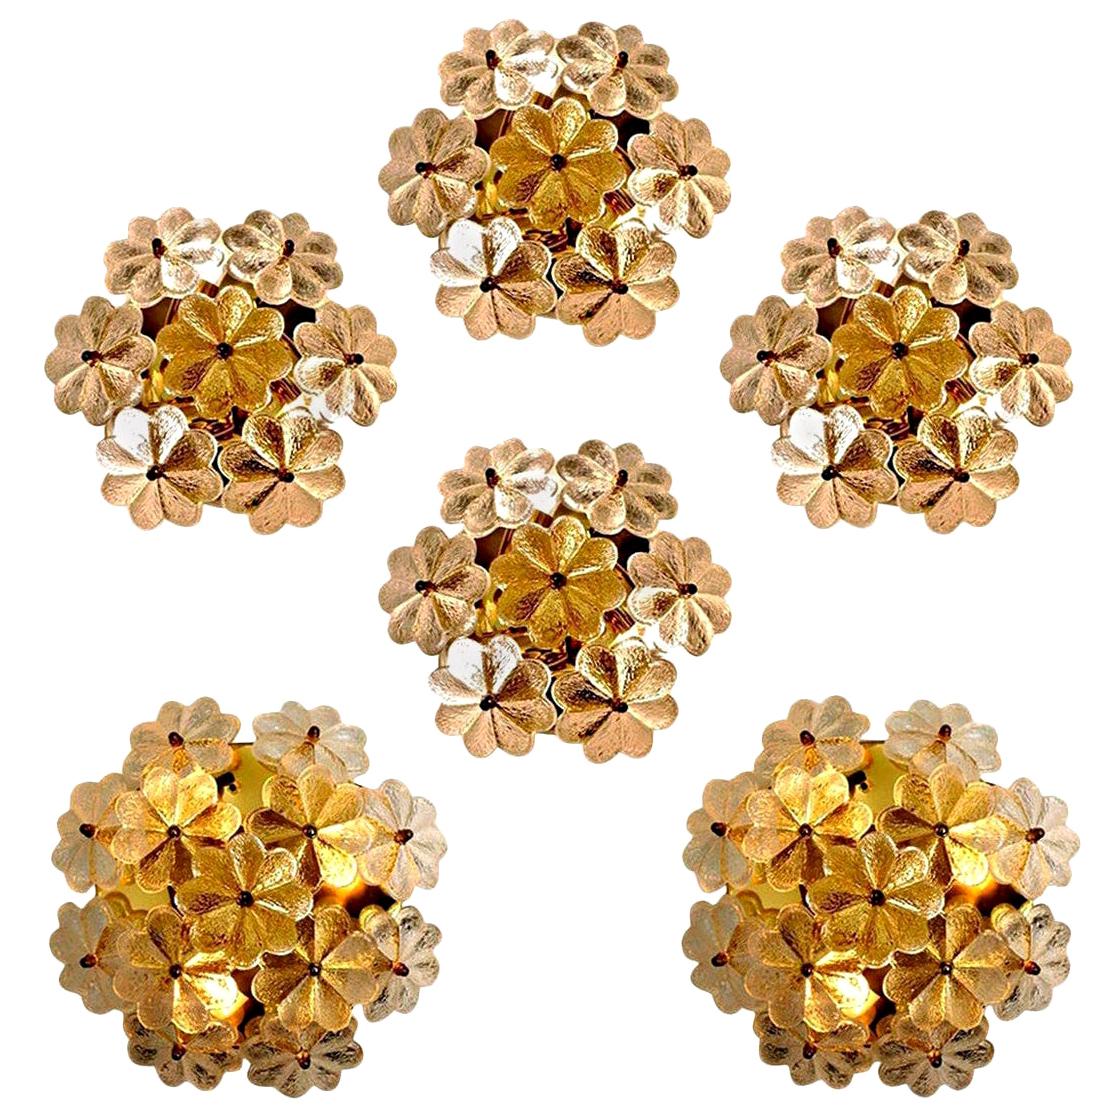 Large sculptural wall sconces have the design of a bouquet of textured glass flowers and are from the historical lighting company Ernst Palme. Each clear glass flower shade has textured petals and is securely screwed in place to the frame with a